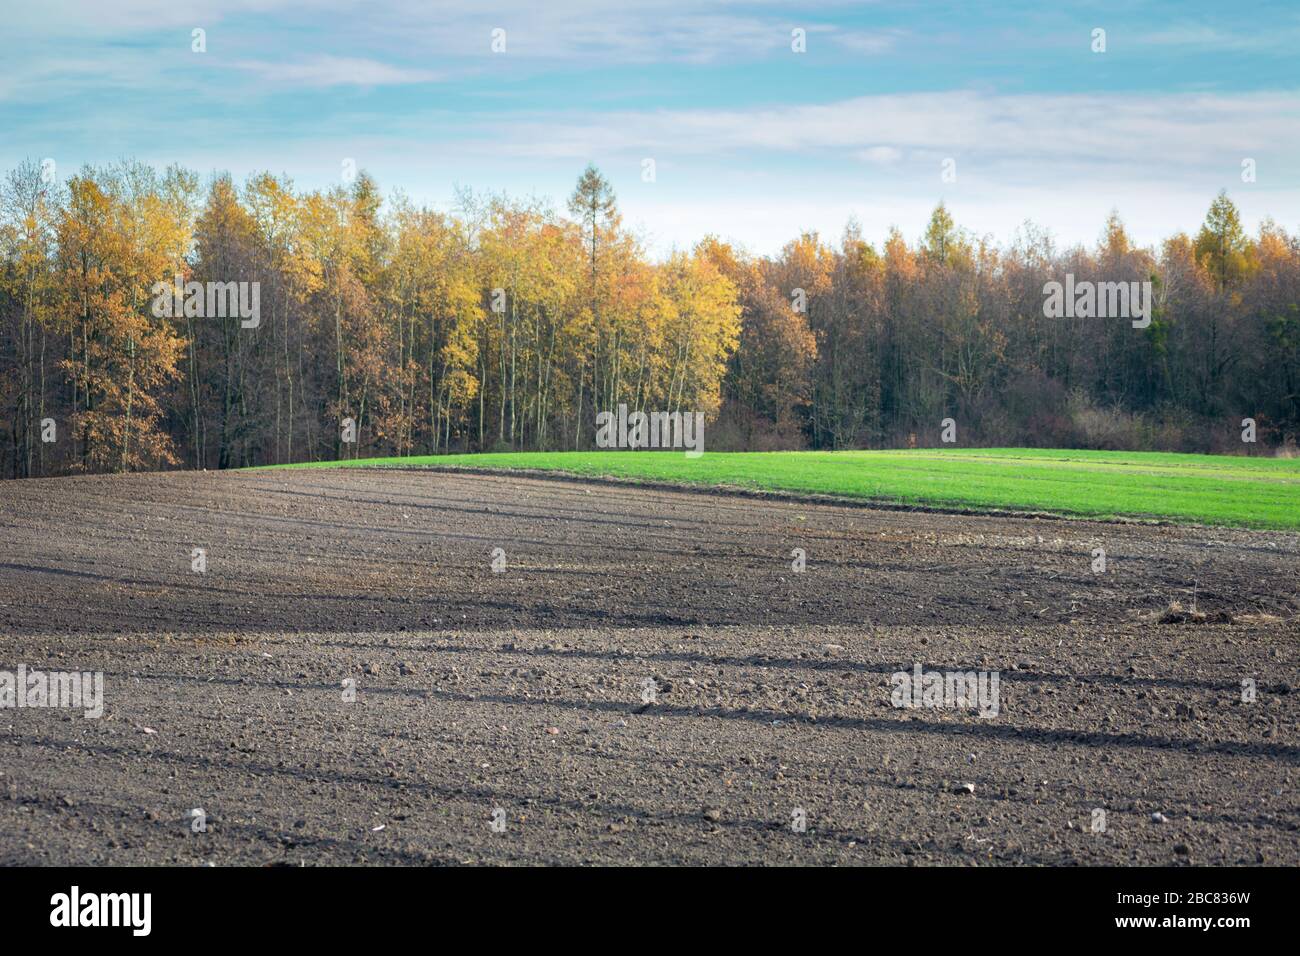 Plowed hilly fields, autumn forest and sky, focus in the foreground Stock Photo